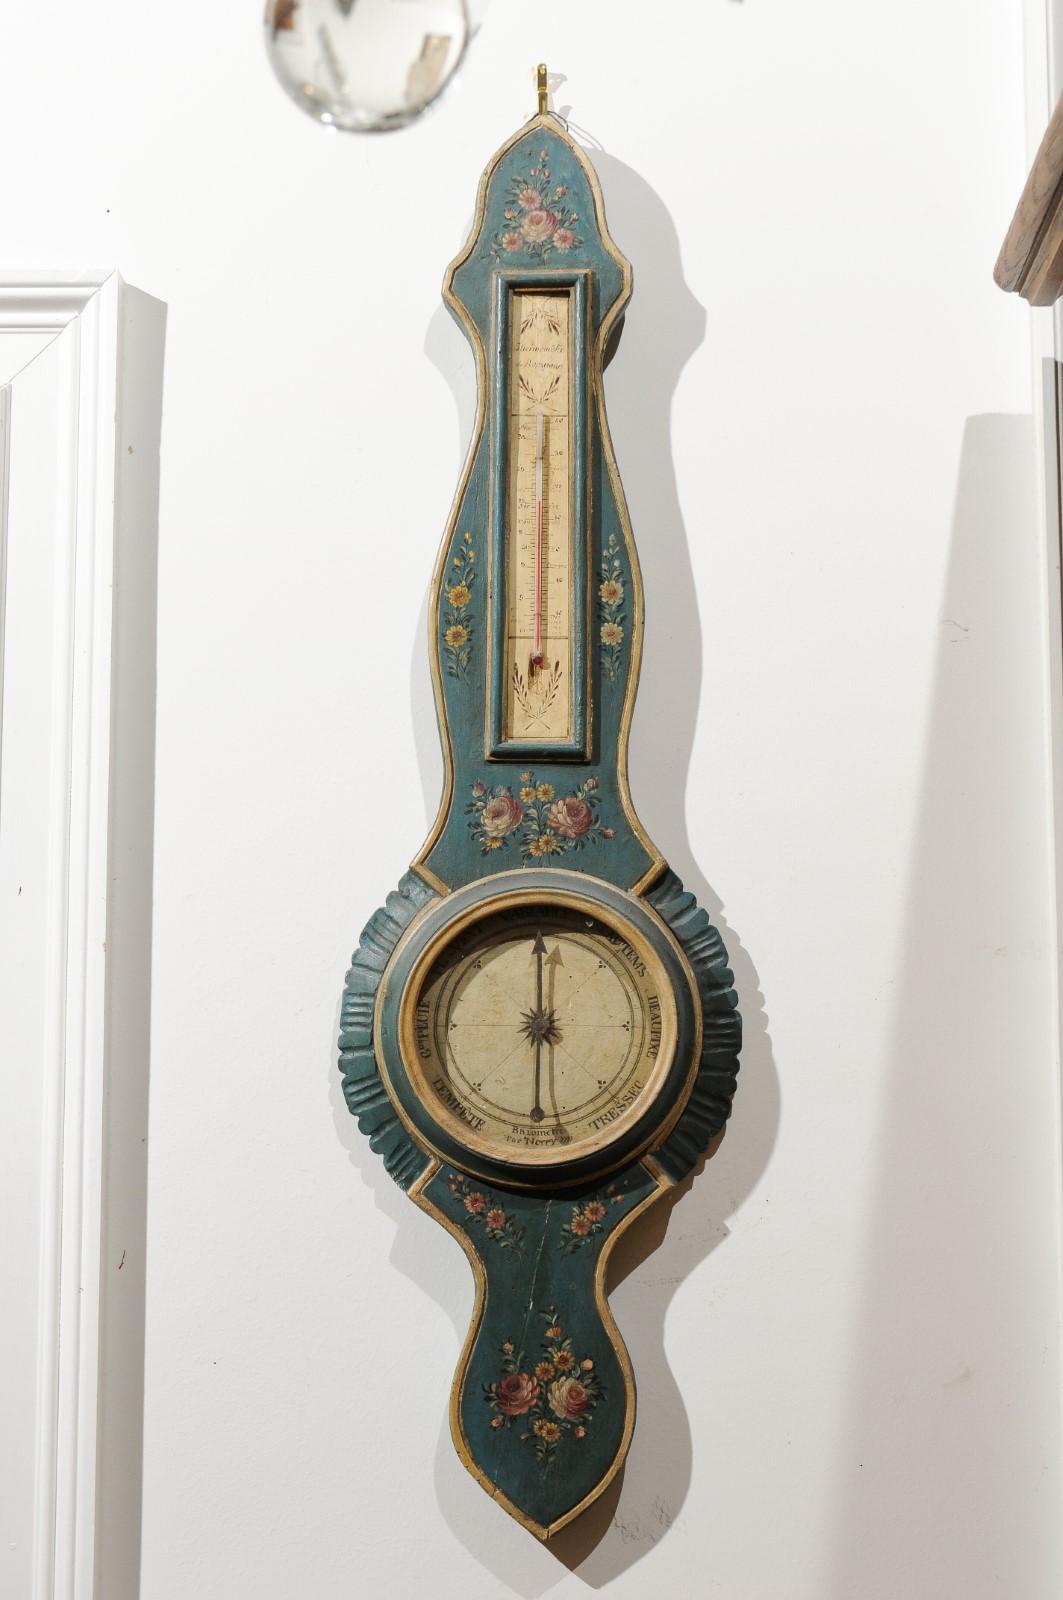 A French provençal wooden barometer from the late 18th century, with hand painted floral décor and thermometer. Born in Provence during the later years of the 18th century, this lovely barometer features a tall Silhouette, presenting sinuous